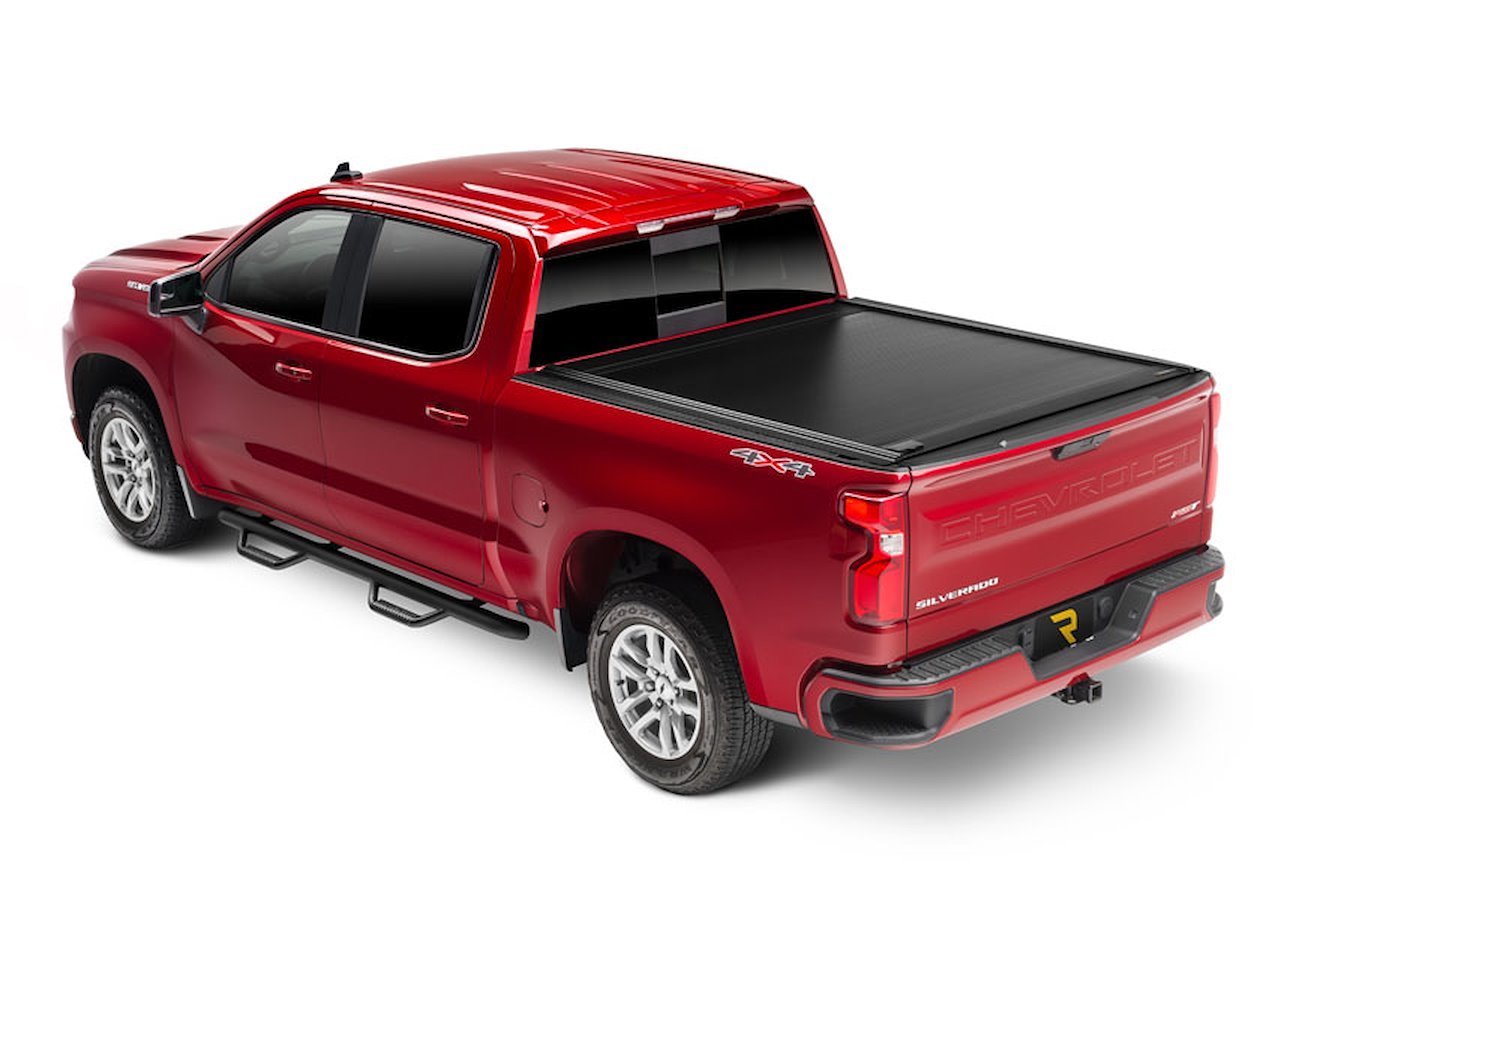 60488 RetraxOne MX Retractable Tonneau Cover Fits Select GMC Sierra (with CarbonPro Bed) 5' 9" Bed without Stake Pockets